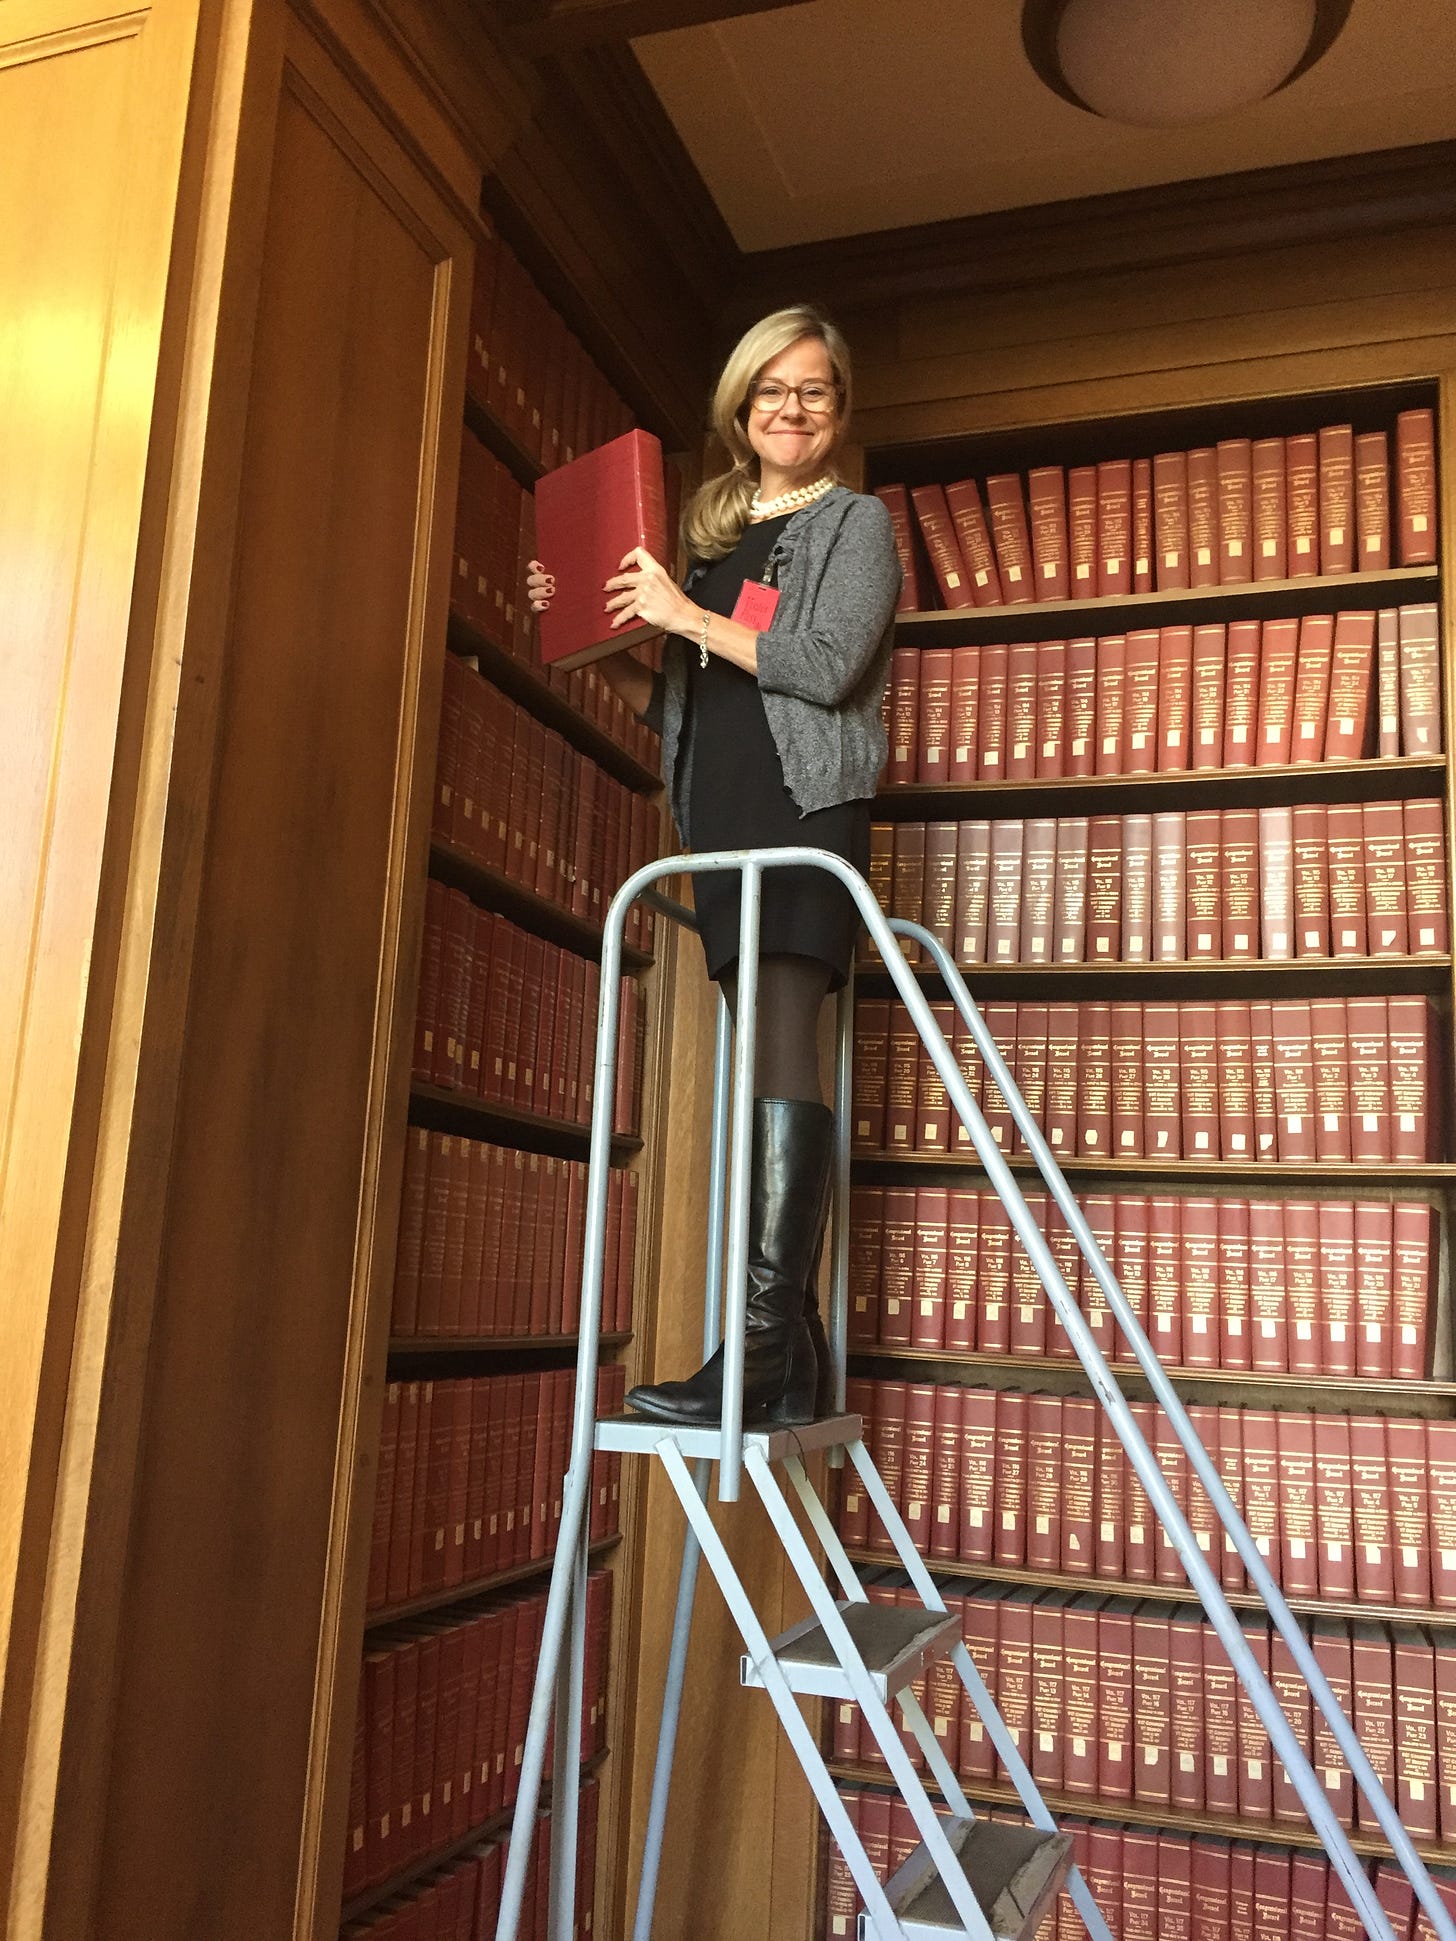 Author/speaker/memoir-writing coach Christine Wolf in Washington, D.C., conducting research in The National Archives (2017). She's wearing a gray cardigan, black dress and boots, and pearls. She's on a high ladder, holding a red book, surrounded by red archival volumes.